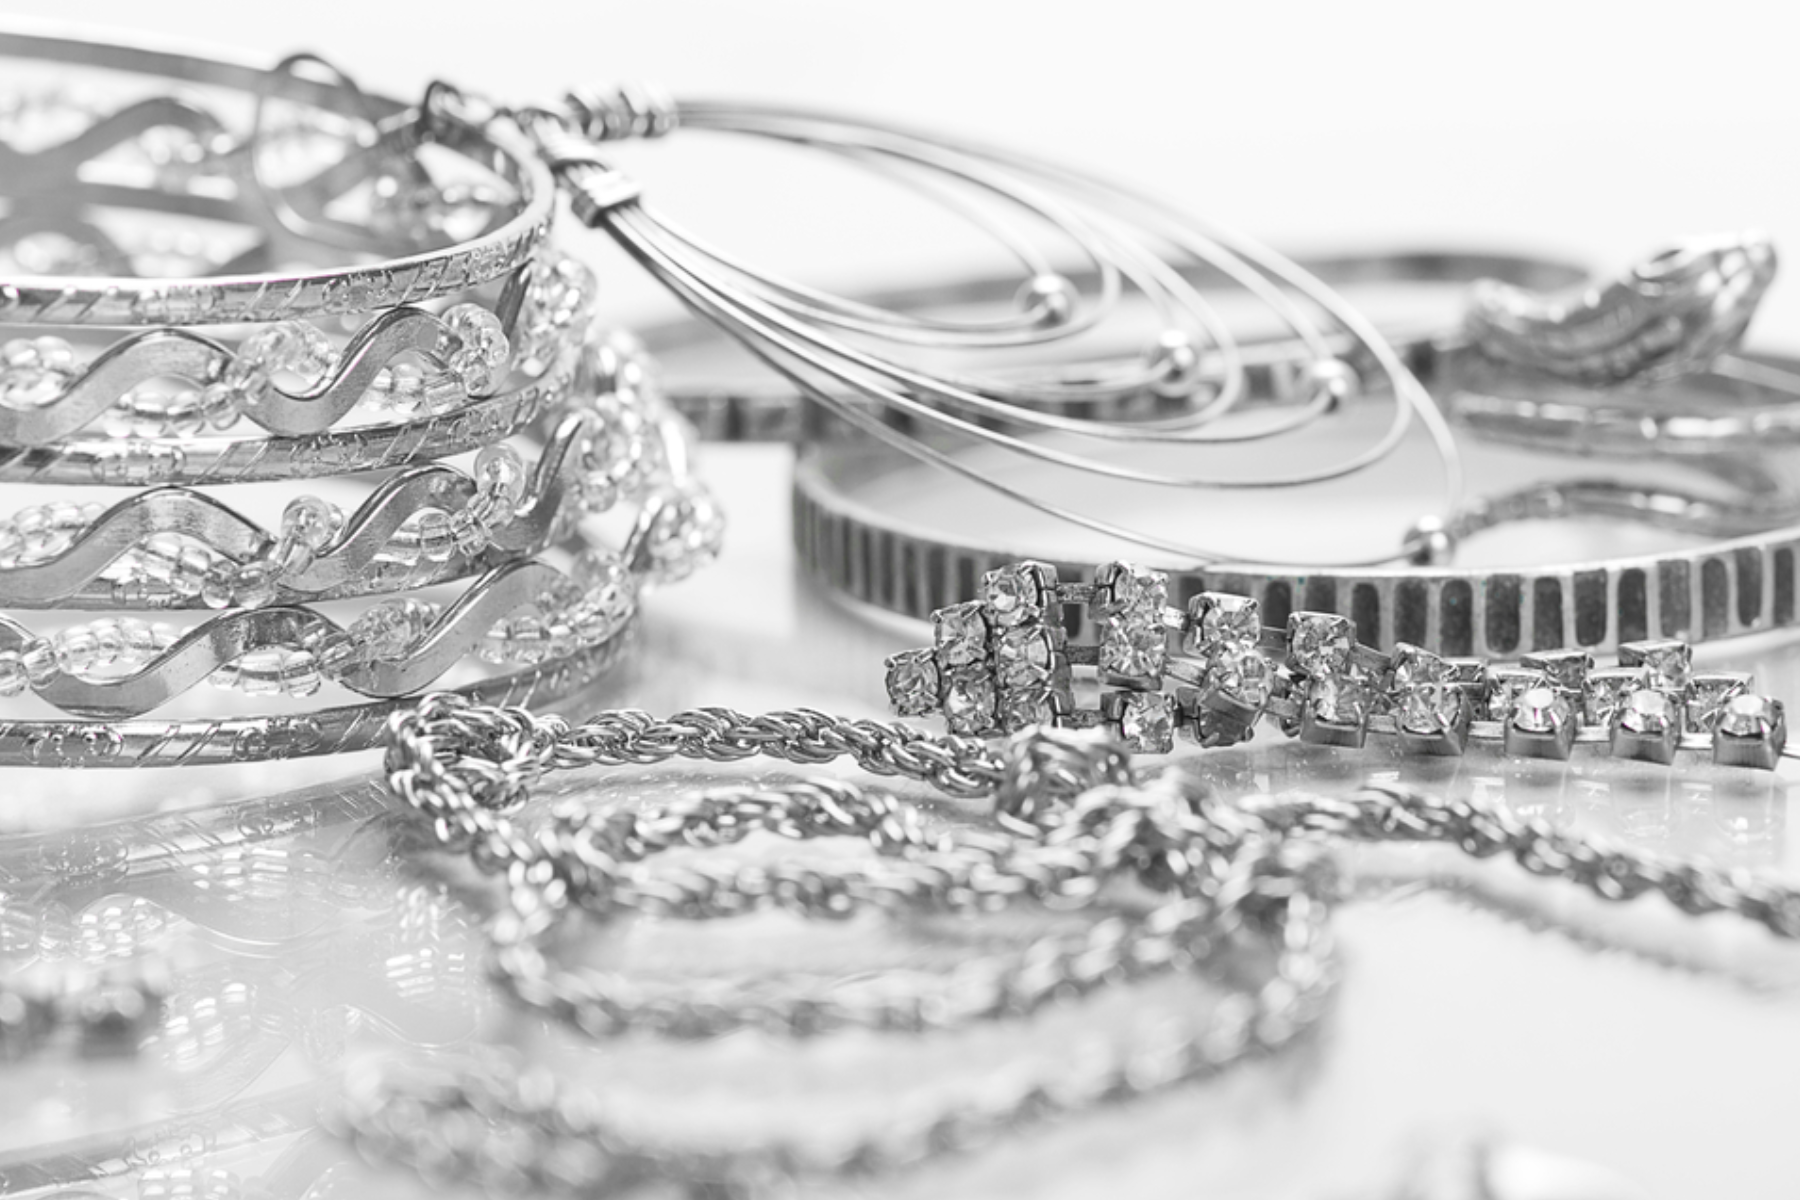 Many types of silver jewelry